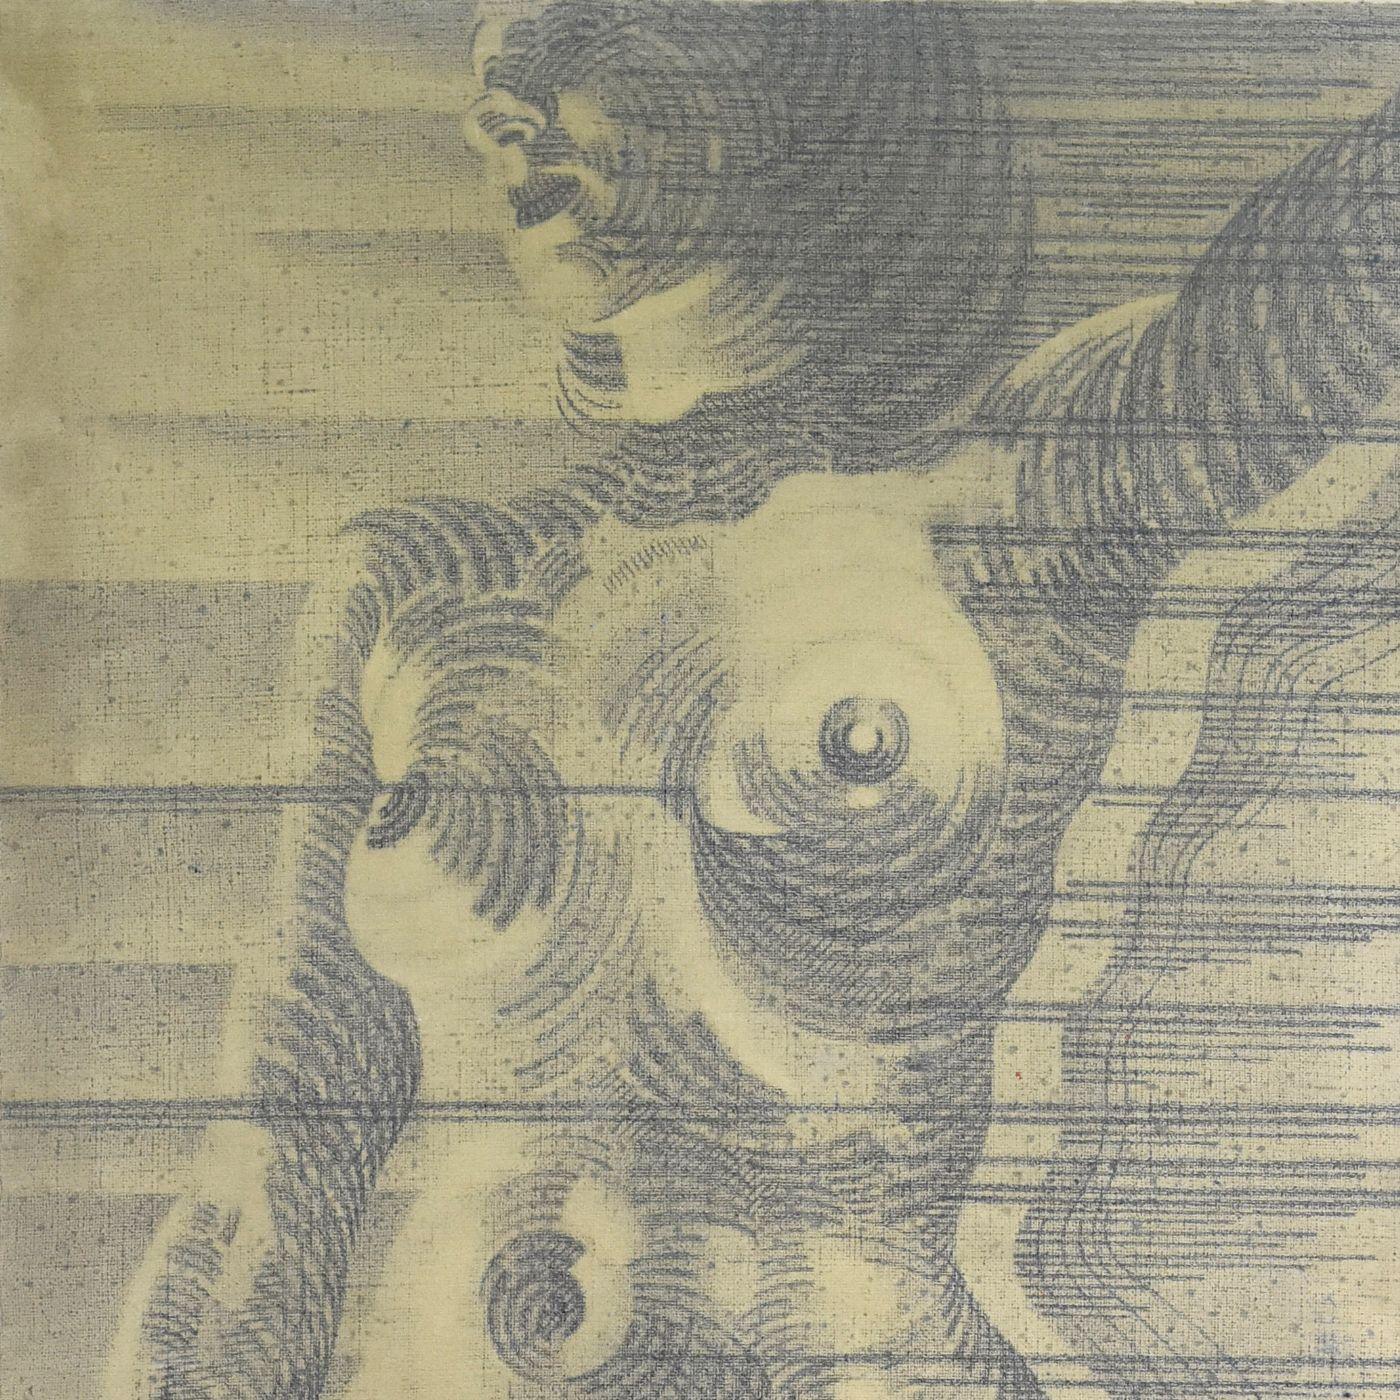 Charcoal and sanguine woman on French school textile Martinez 60s in size (209x186 cm) representing a woman's silhouette.